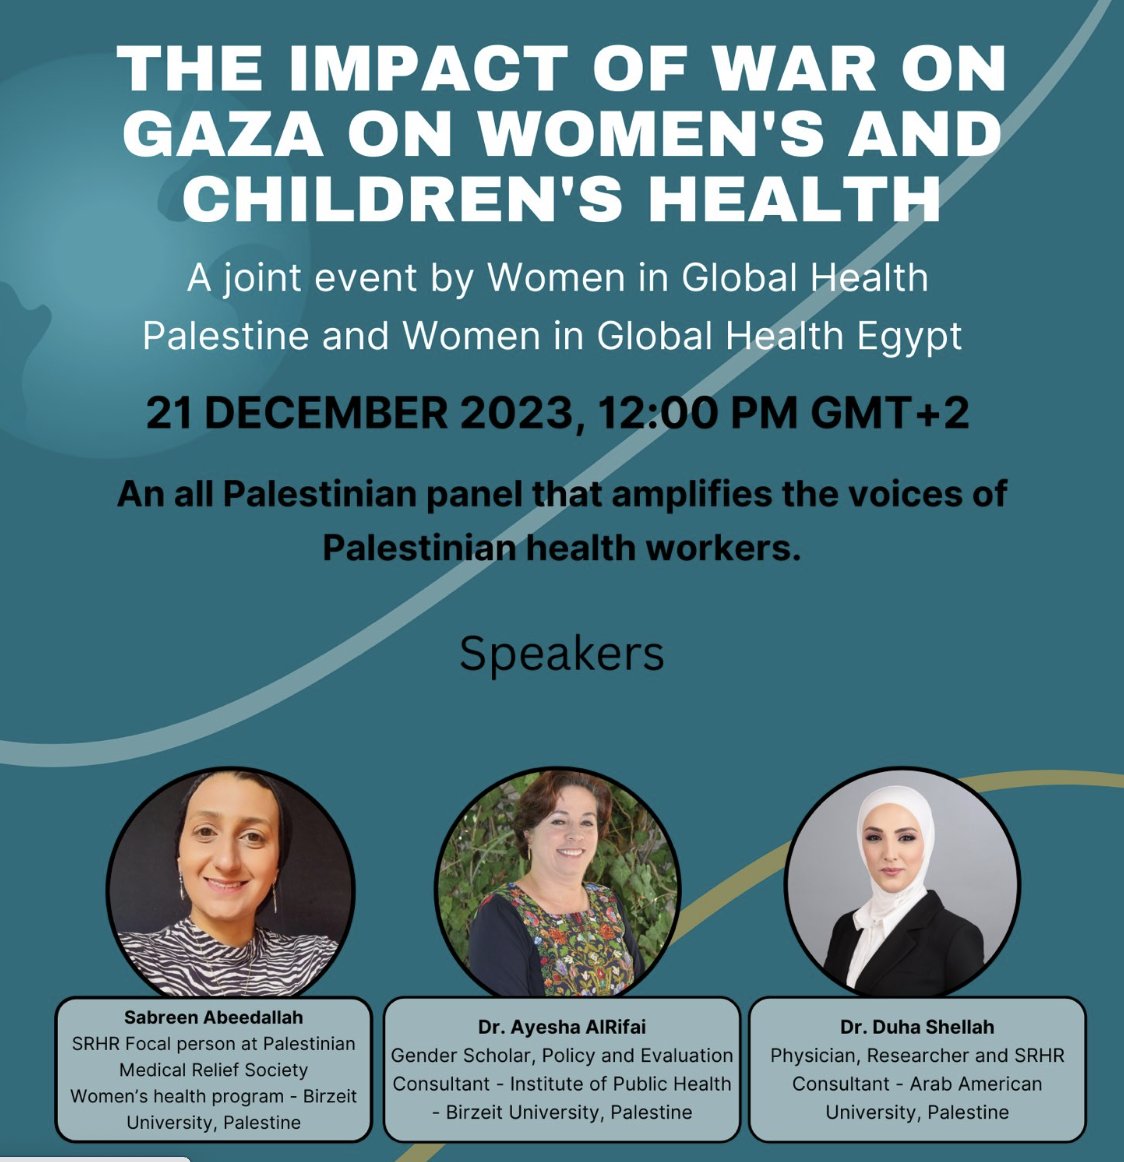 Just hearing great webinar by @womeninGH on effect of #Gaza_War on women & children Health services barely exist Only one crucial area - #immunization For past 2 months, there has been NO vaccination or preventive care services for mothers & newborns #PermanentCeaseFireNow